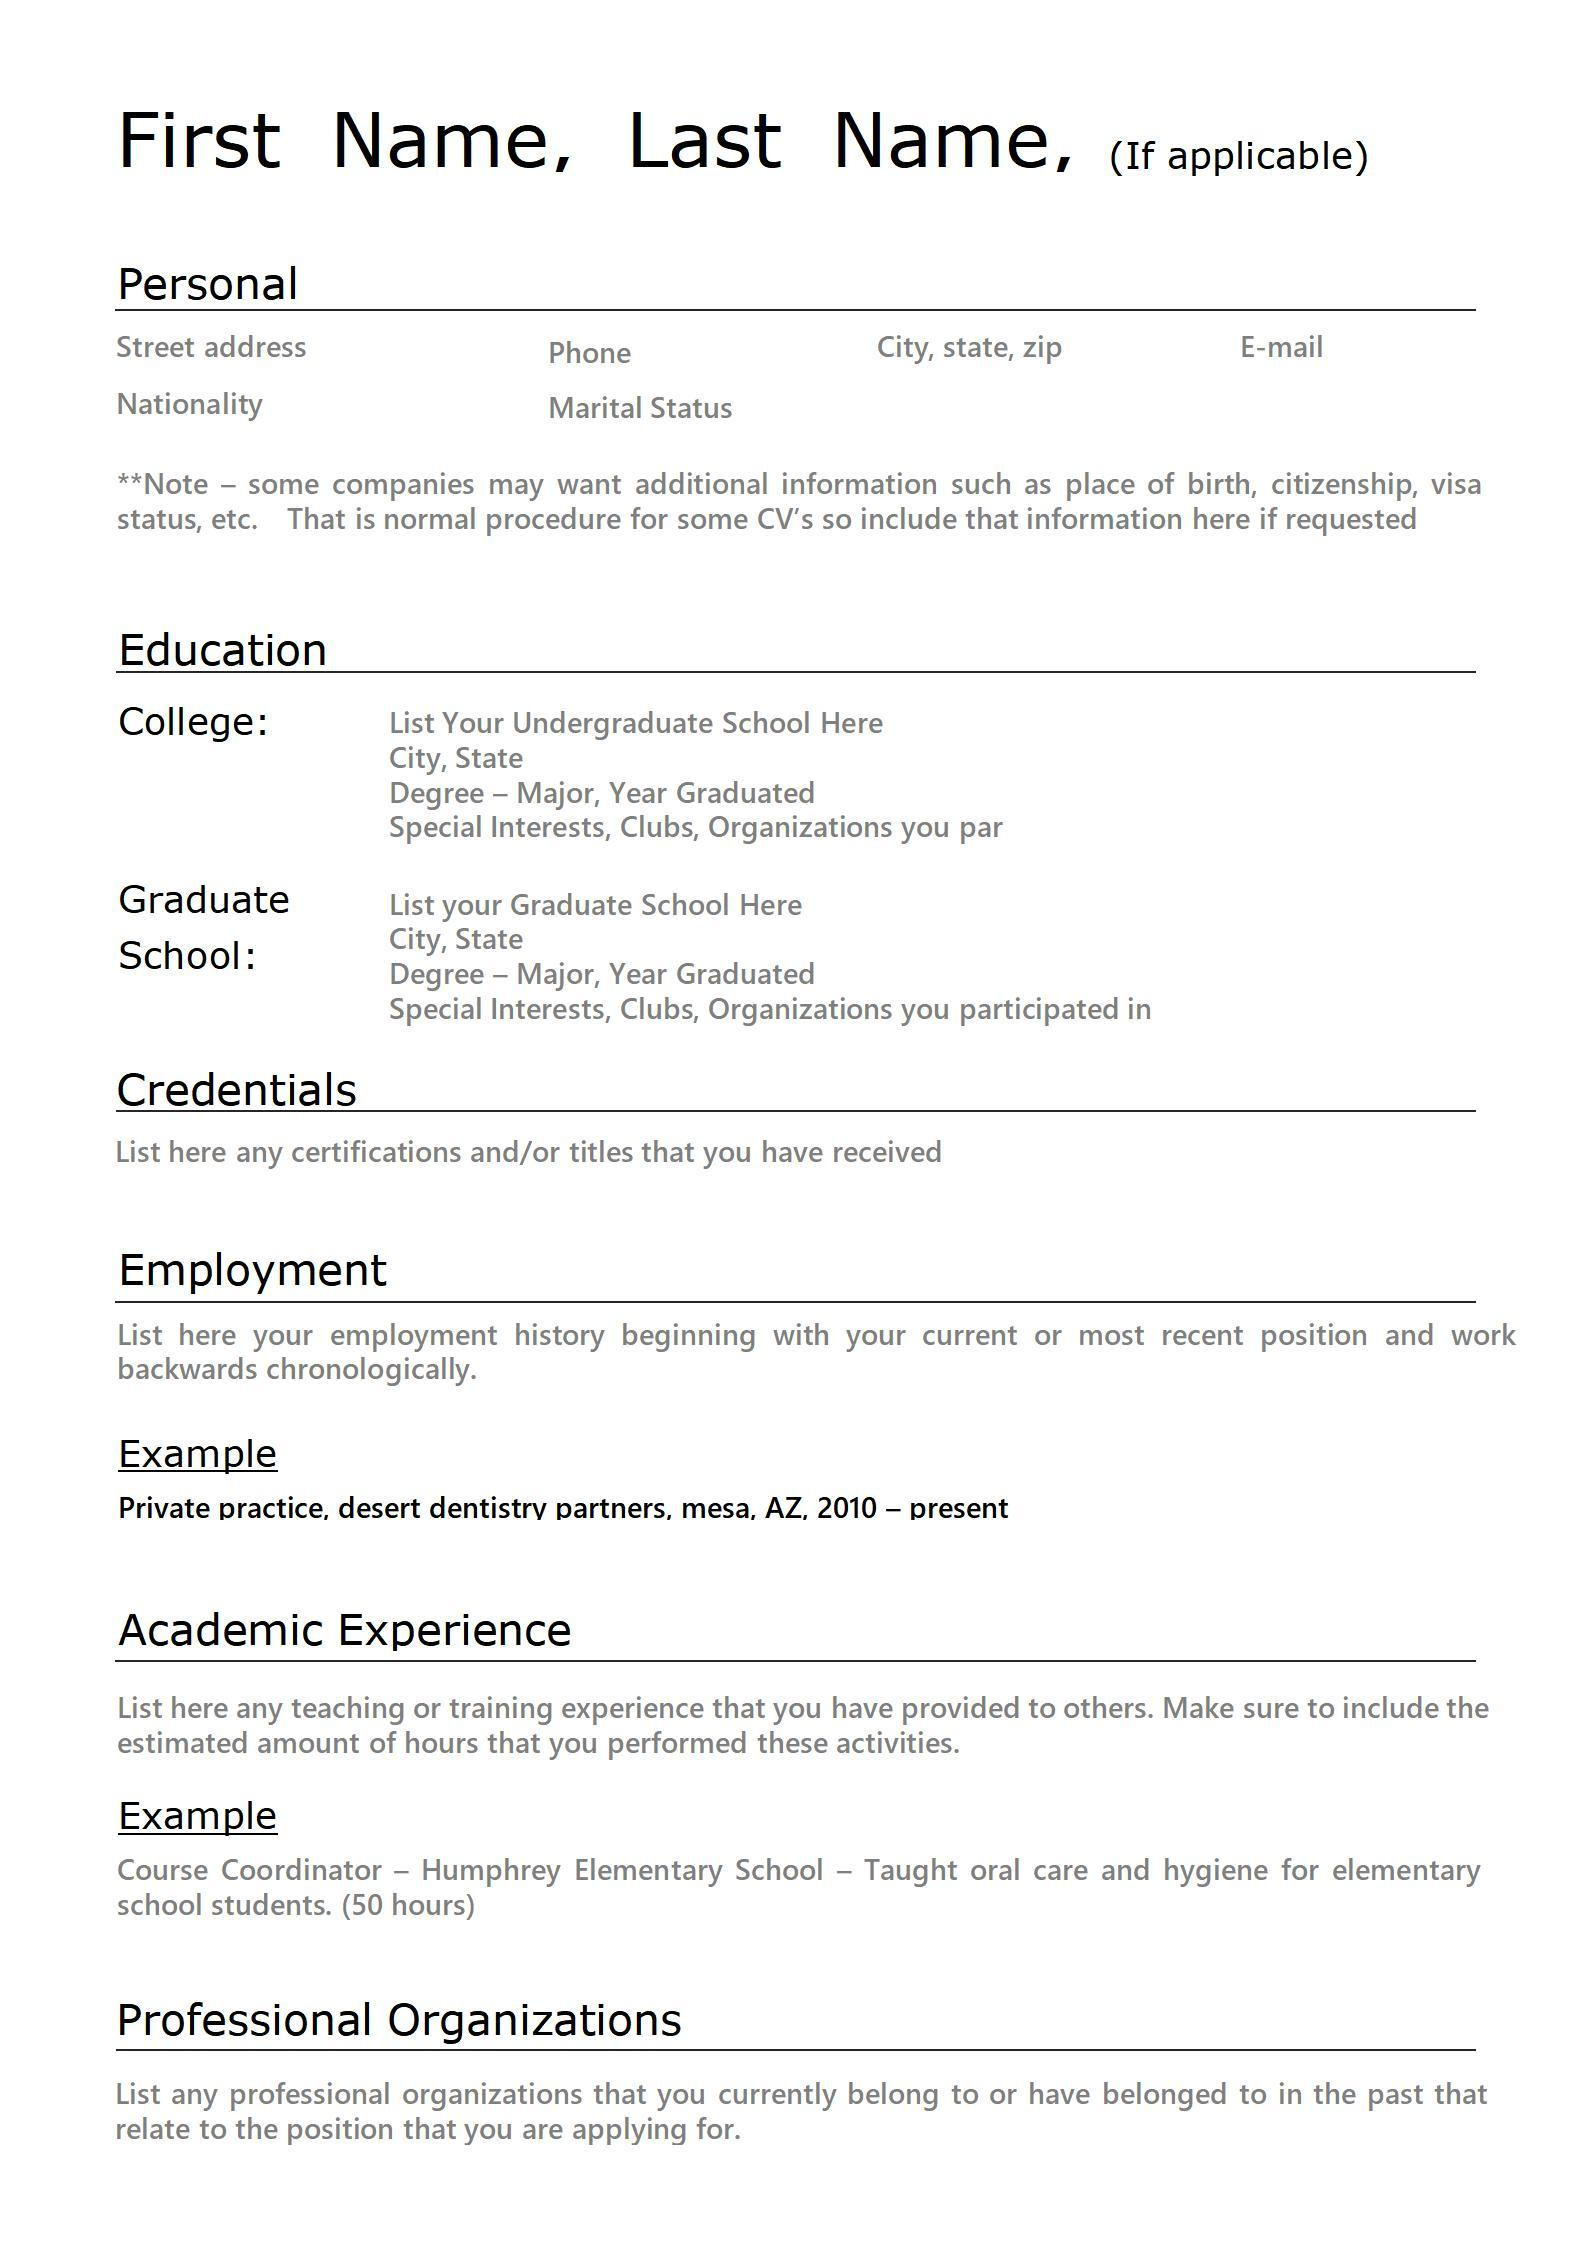 Resume for Teenager with No Work Experience Sample First-time Resume with No Experience Samples Wps Office Academy